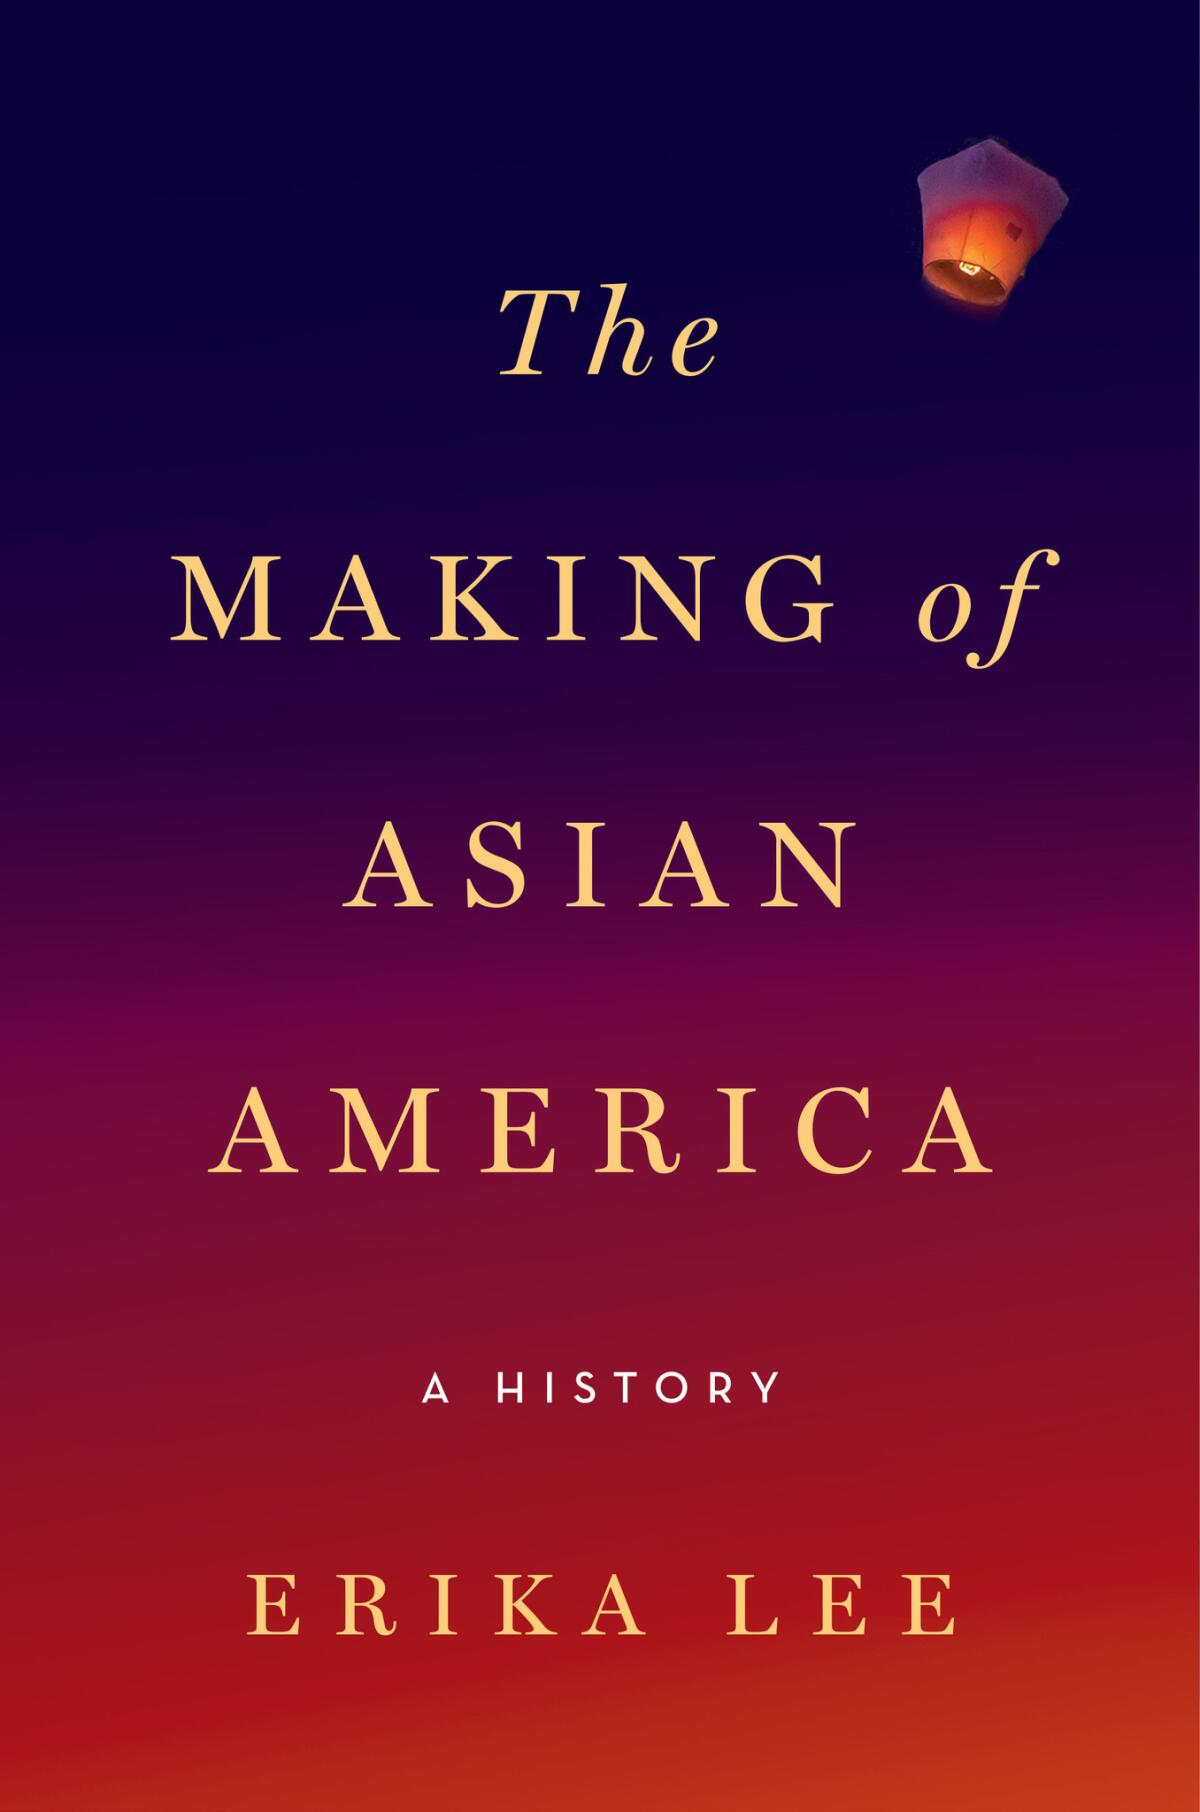 "The Making of Asian America" by Erika Lee